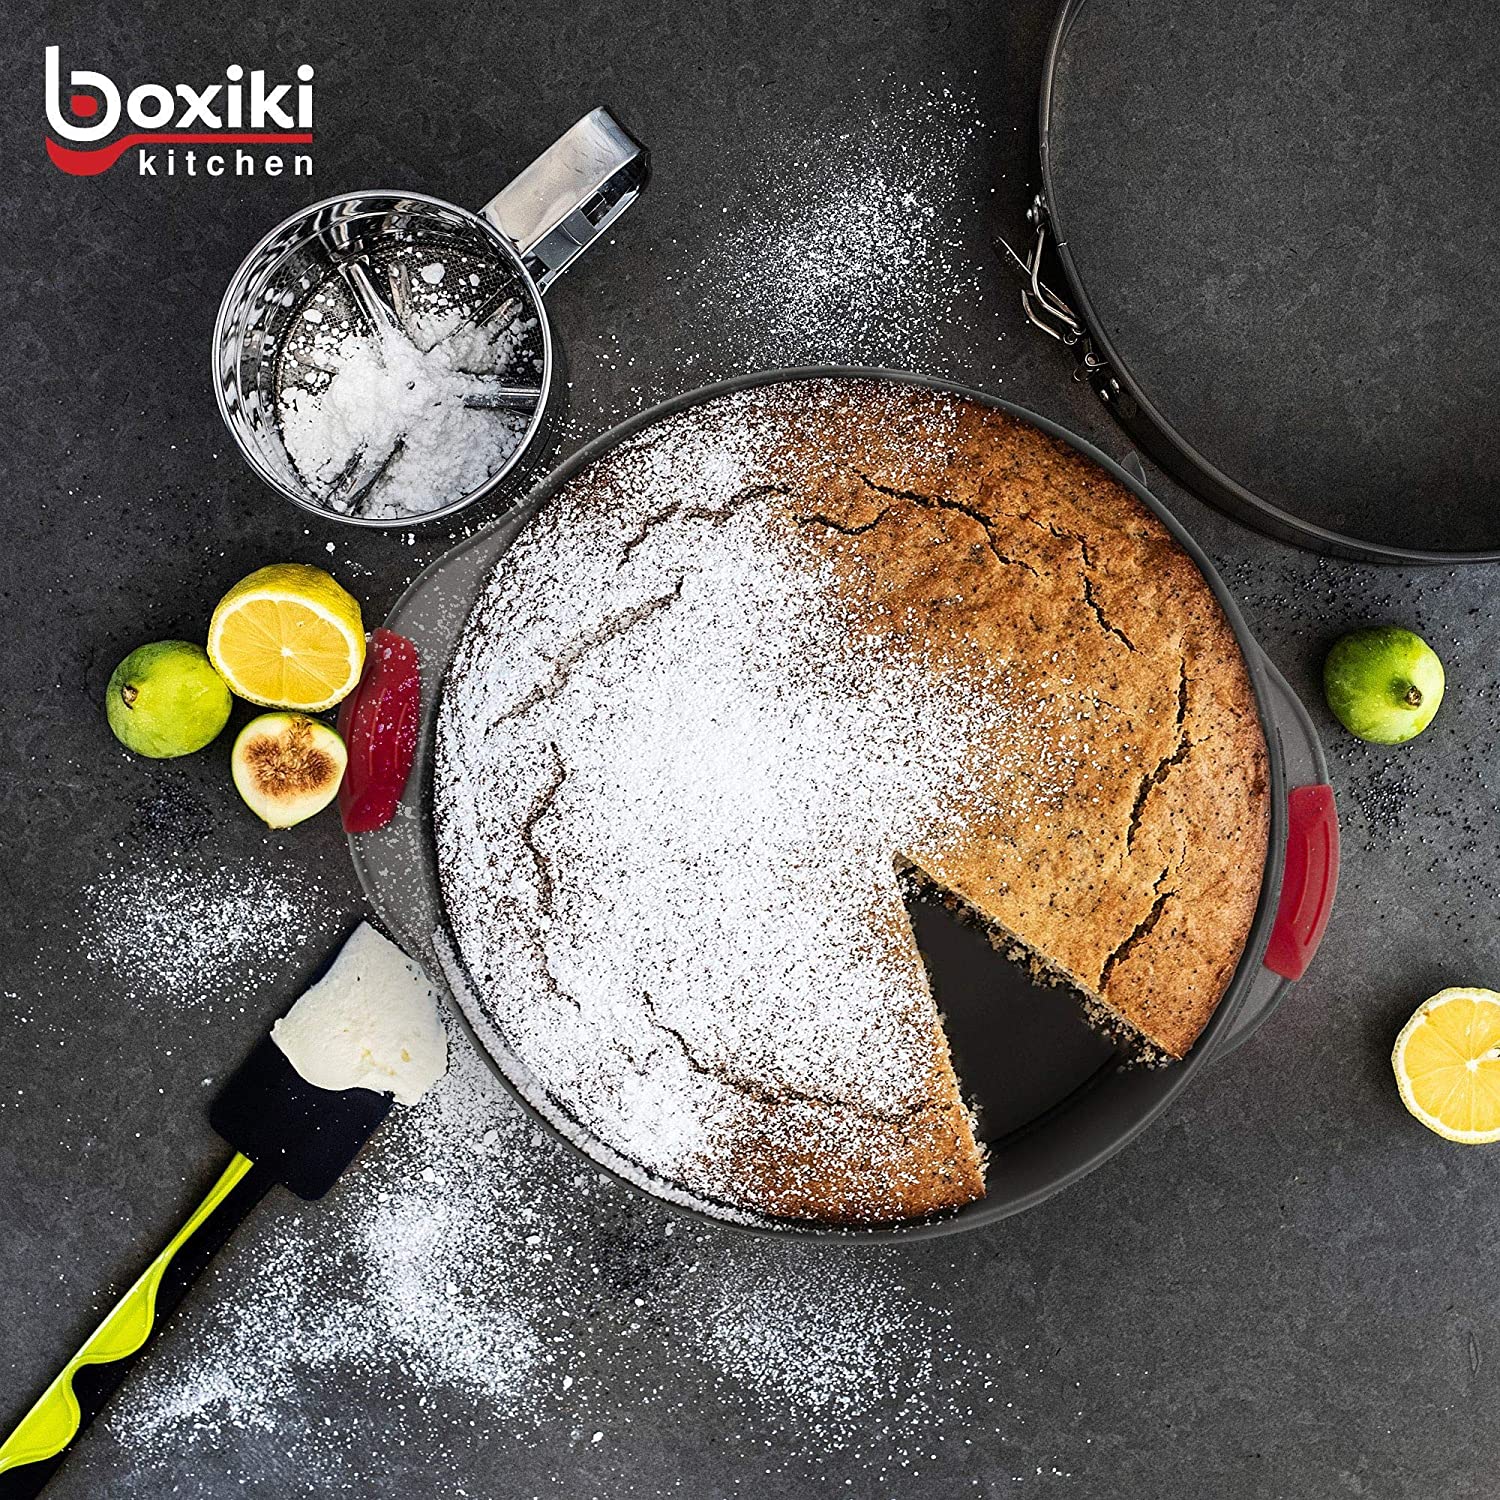 Boxiki Kitchen 10 Inch Nonstick Springform Pan, Professional Spring Form  and Cheesecake Baking Mold, Leakproof Cake Pan With Silicone Handles